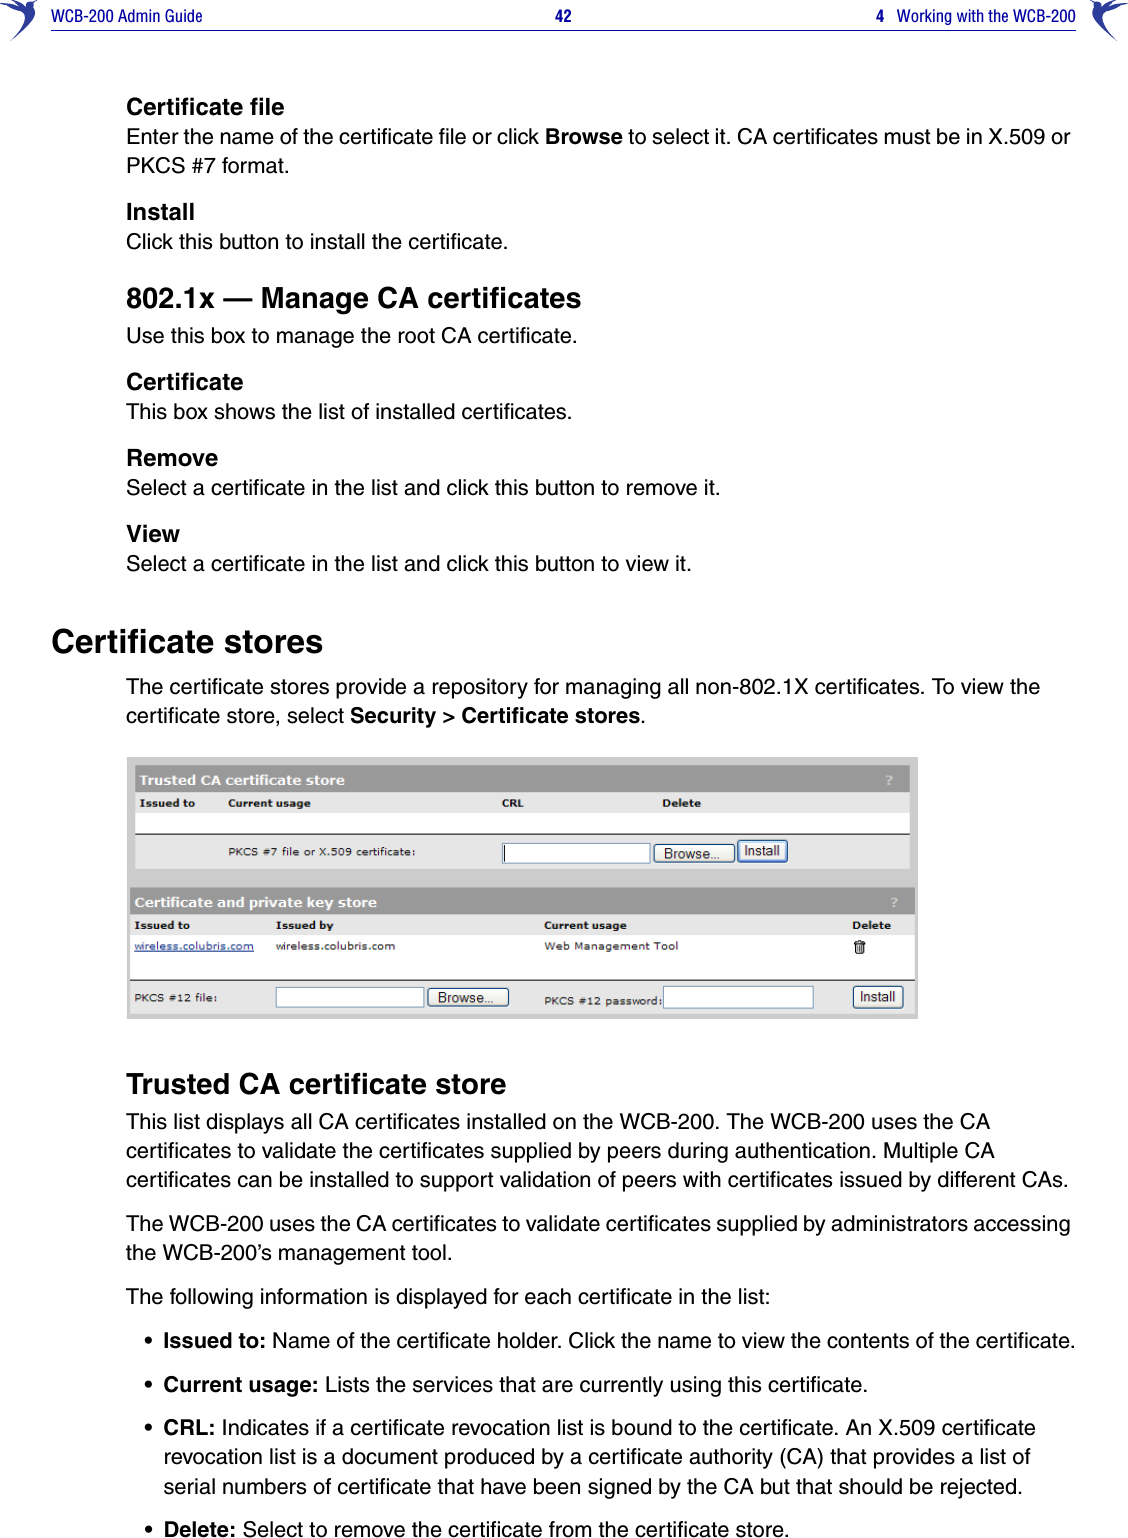 WCB-200 Admin Guide 42  4   Working with the WCB-200Certificate fileEnter the name of the certificate file or click Browse to select it. CA certificates must be in X.509 or PKCS #7 format.InstallClick this button to install the certificate.802.1x — Manage CA certificatesUse this box to manage the root CA certificate.CertificateThis box shows the list of installed certificates.RemoveSelect a certificate in the list and click this button to remove it.ViewSelect a certificate in the list and click this button to view it.Certificate storesThe certificate stores provide a repository for managing all non-802.1X certificates. To view the certificate store, select Security &gt; Certificate stores.Trusted CA certificate storeThis list displays all CA certificates installed on the WCB-200. The WCB-200 uses the CA certificates to validate the certificates supplied by peers during authentication. Multiple CA certificates can be installed to support validation of peers with certificates issued by different CAs.The WCB-200 uses the CA certificates to validate certificates supplied by administrators accessing the WCB-200’s management tool.The following information is displayed for each certificate in the list:• Issued to: Name of the certificate holder. Click the name to view the contents of the certificate.• Current usage: Lists the services that are currently using this certificate.• CRL: Indicates if a certificate revocation list is bound to the certificate. An X.509 certificate revocation list is a document produced by a certificate authority (CA) that provides a list of serial numbers of certificate that have been signed by the CA but that should be rejected.• Delete: Select to remove the certificate from the certificate store.